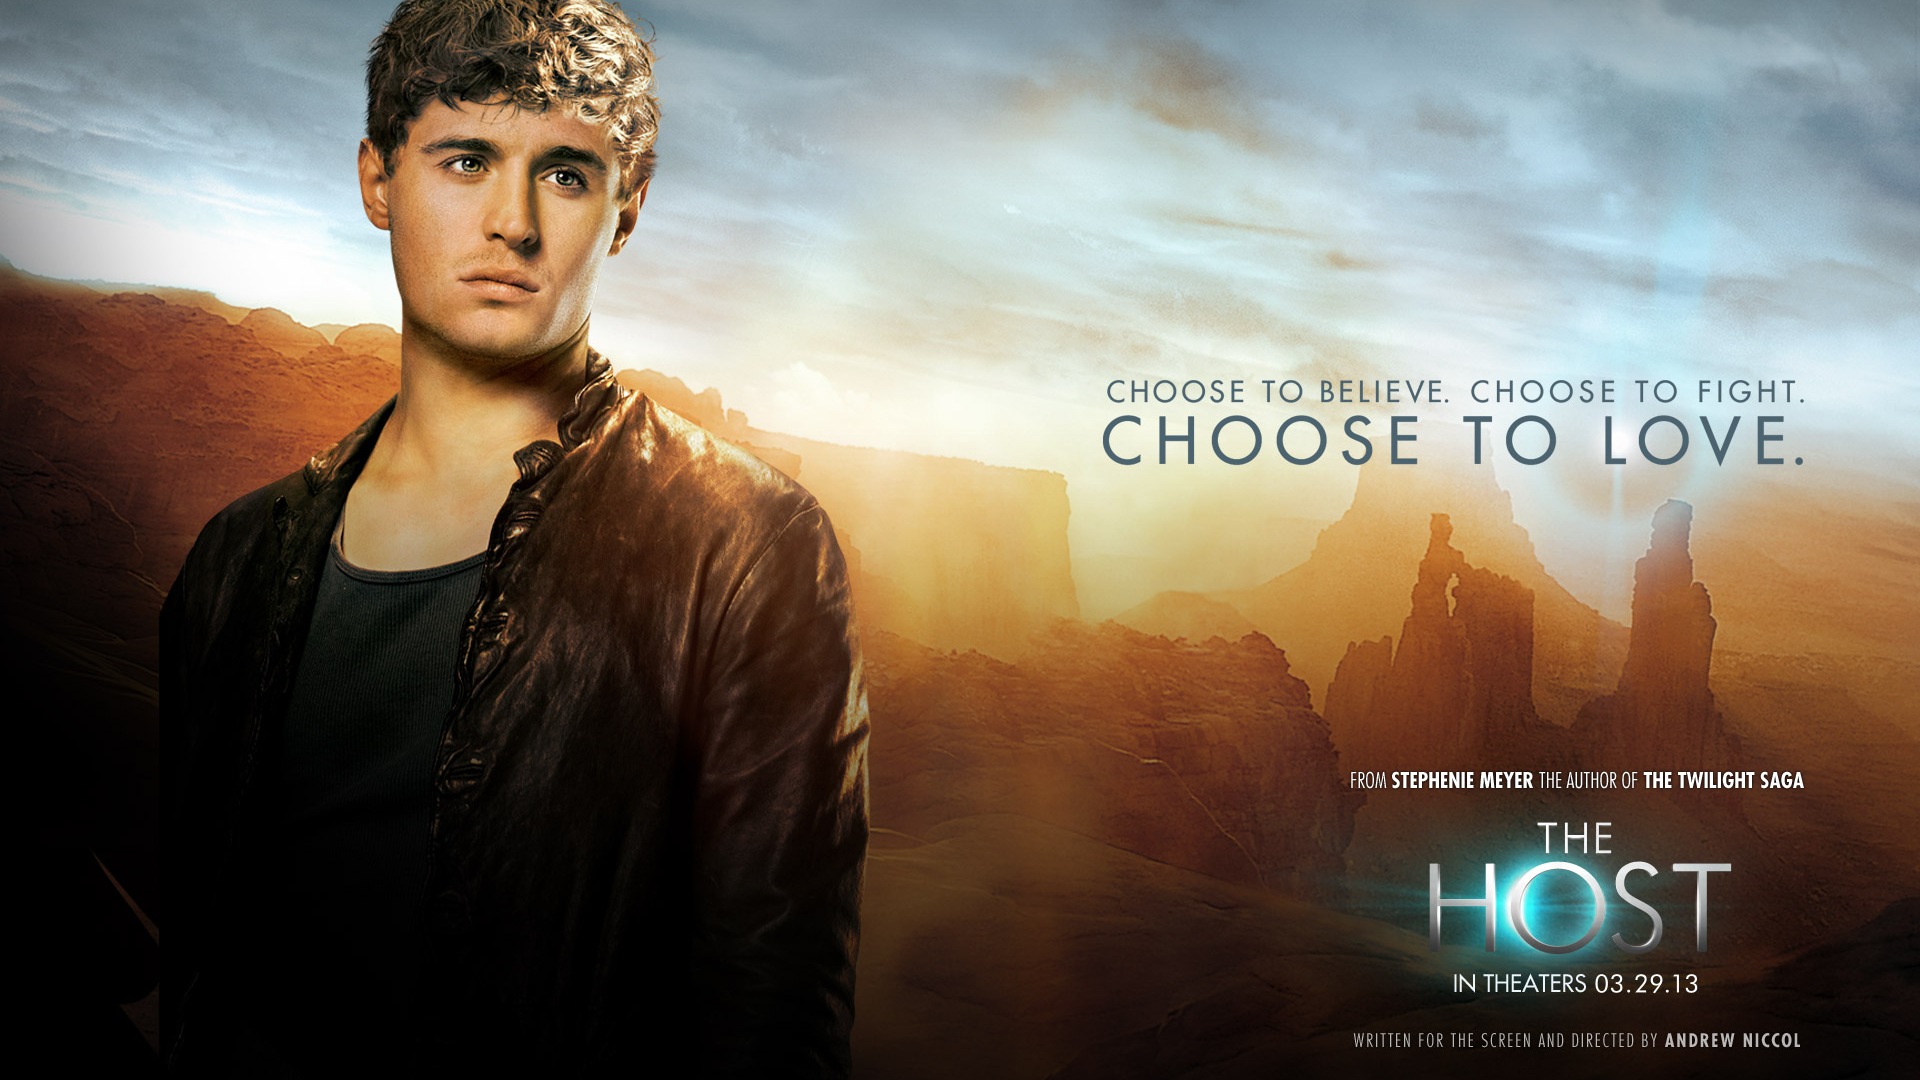 The Host 2013 movie HD wallpapers #17 - 1920x1080